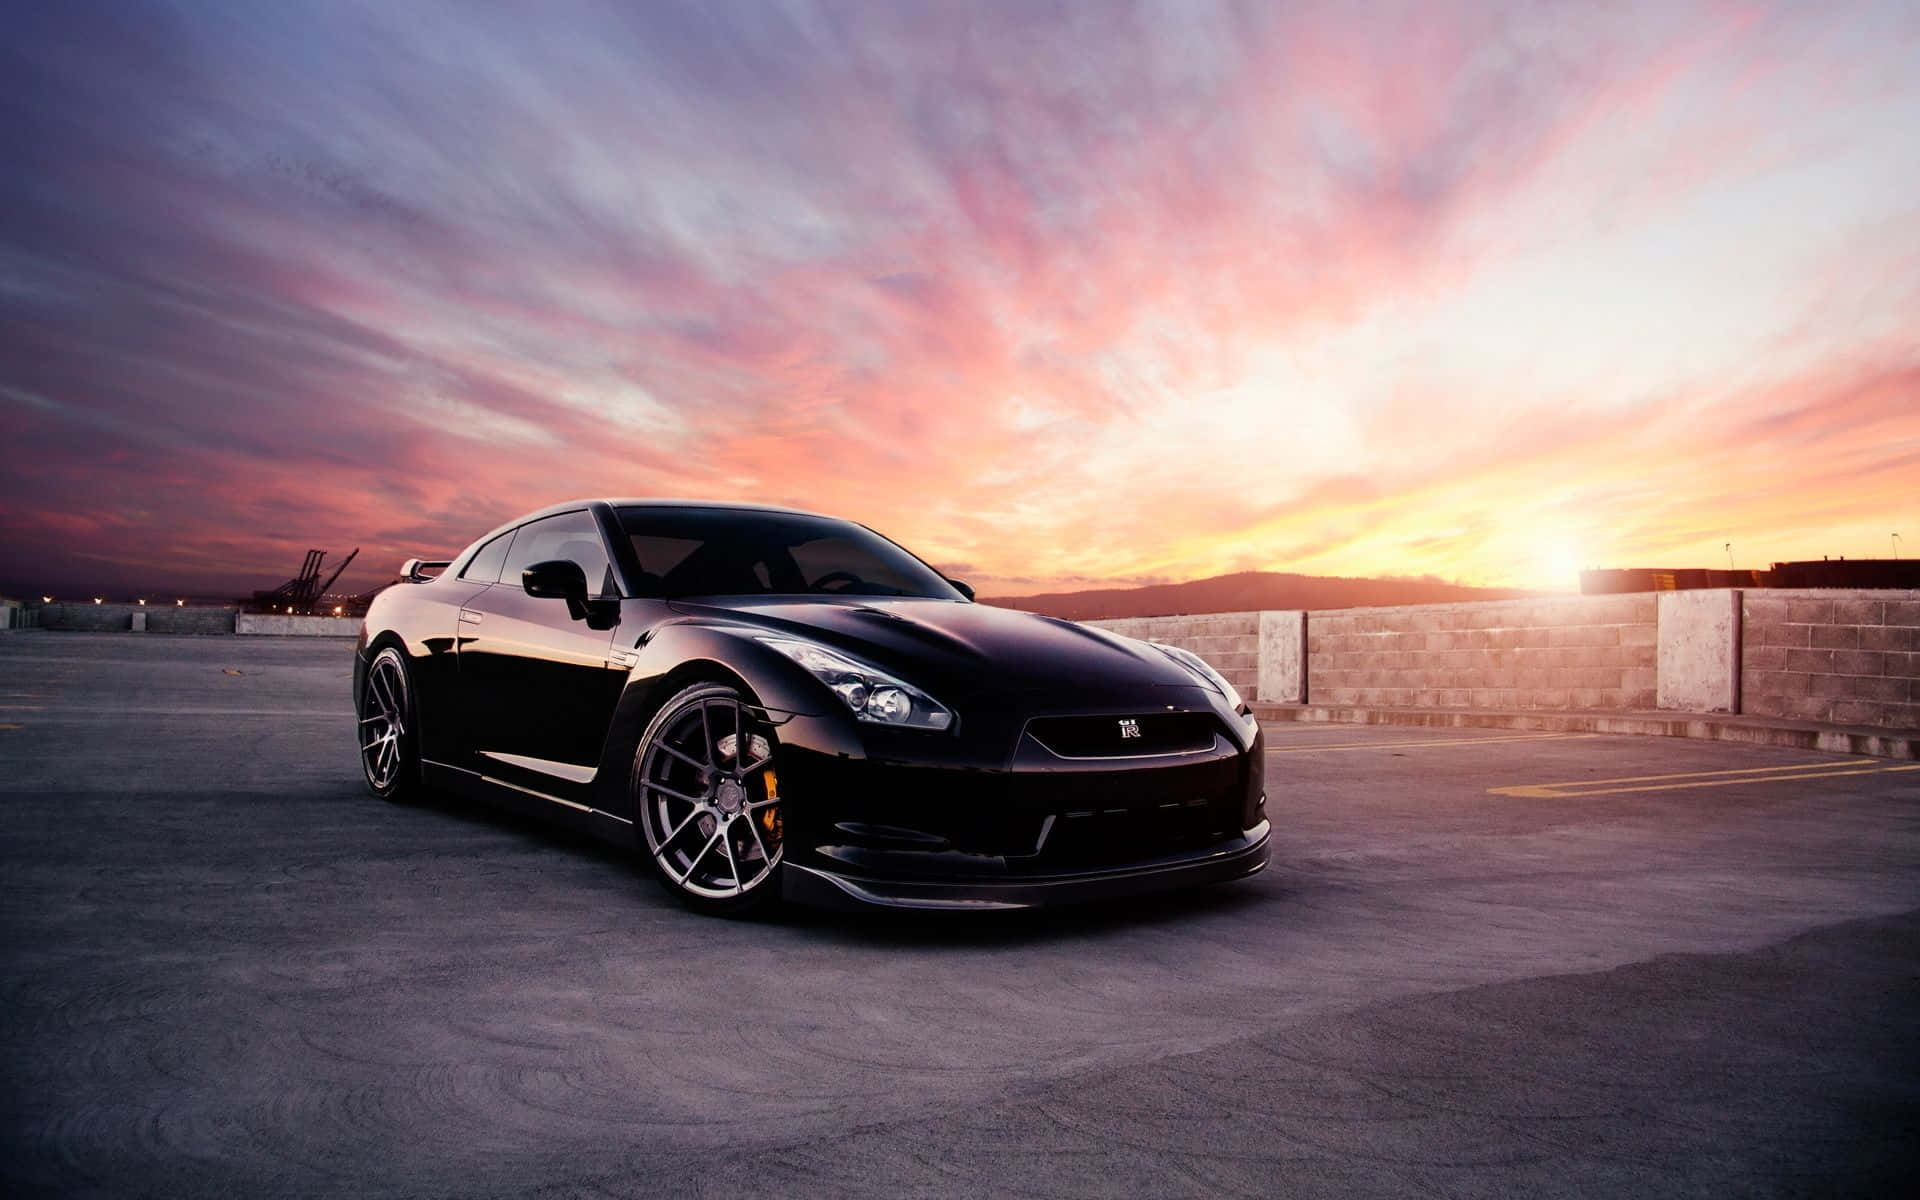 Red and Black Nissan GTR that's Sure To Turn Heads